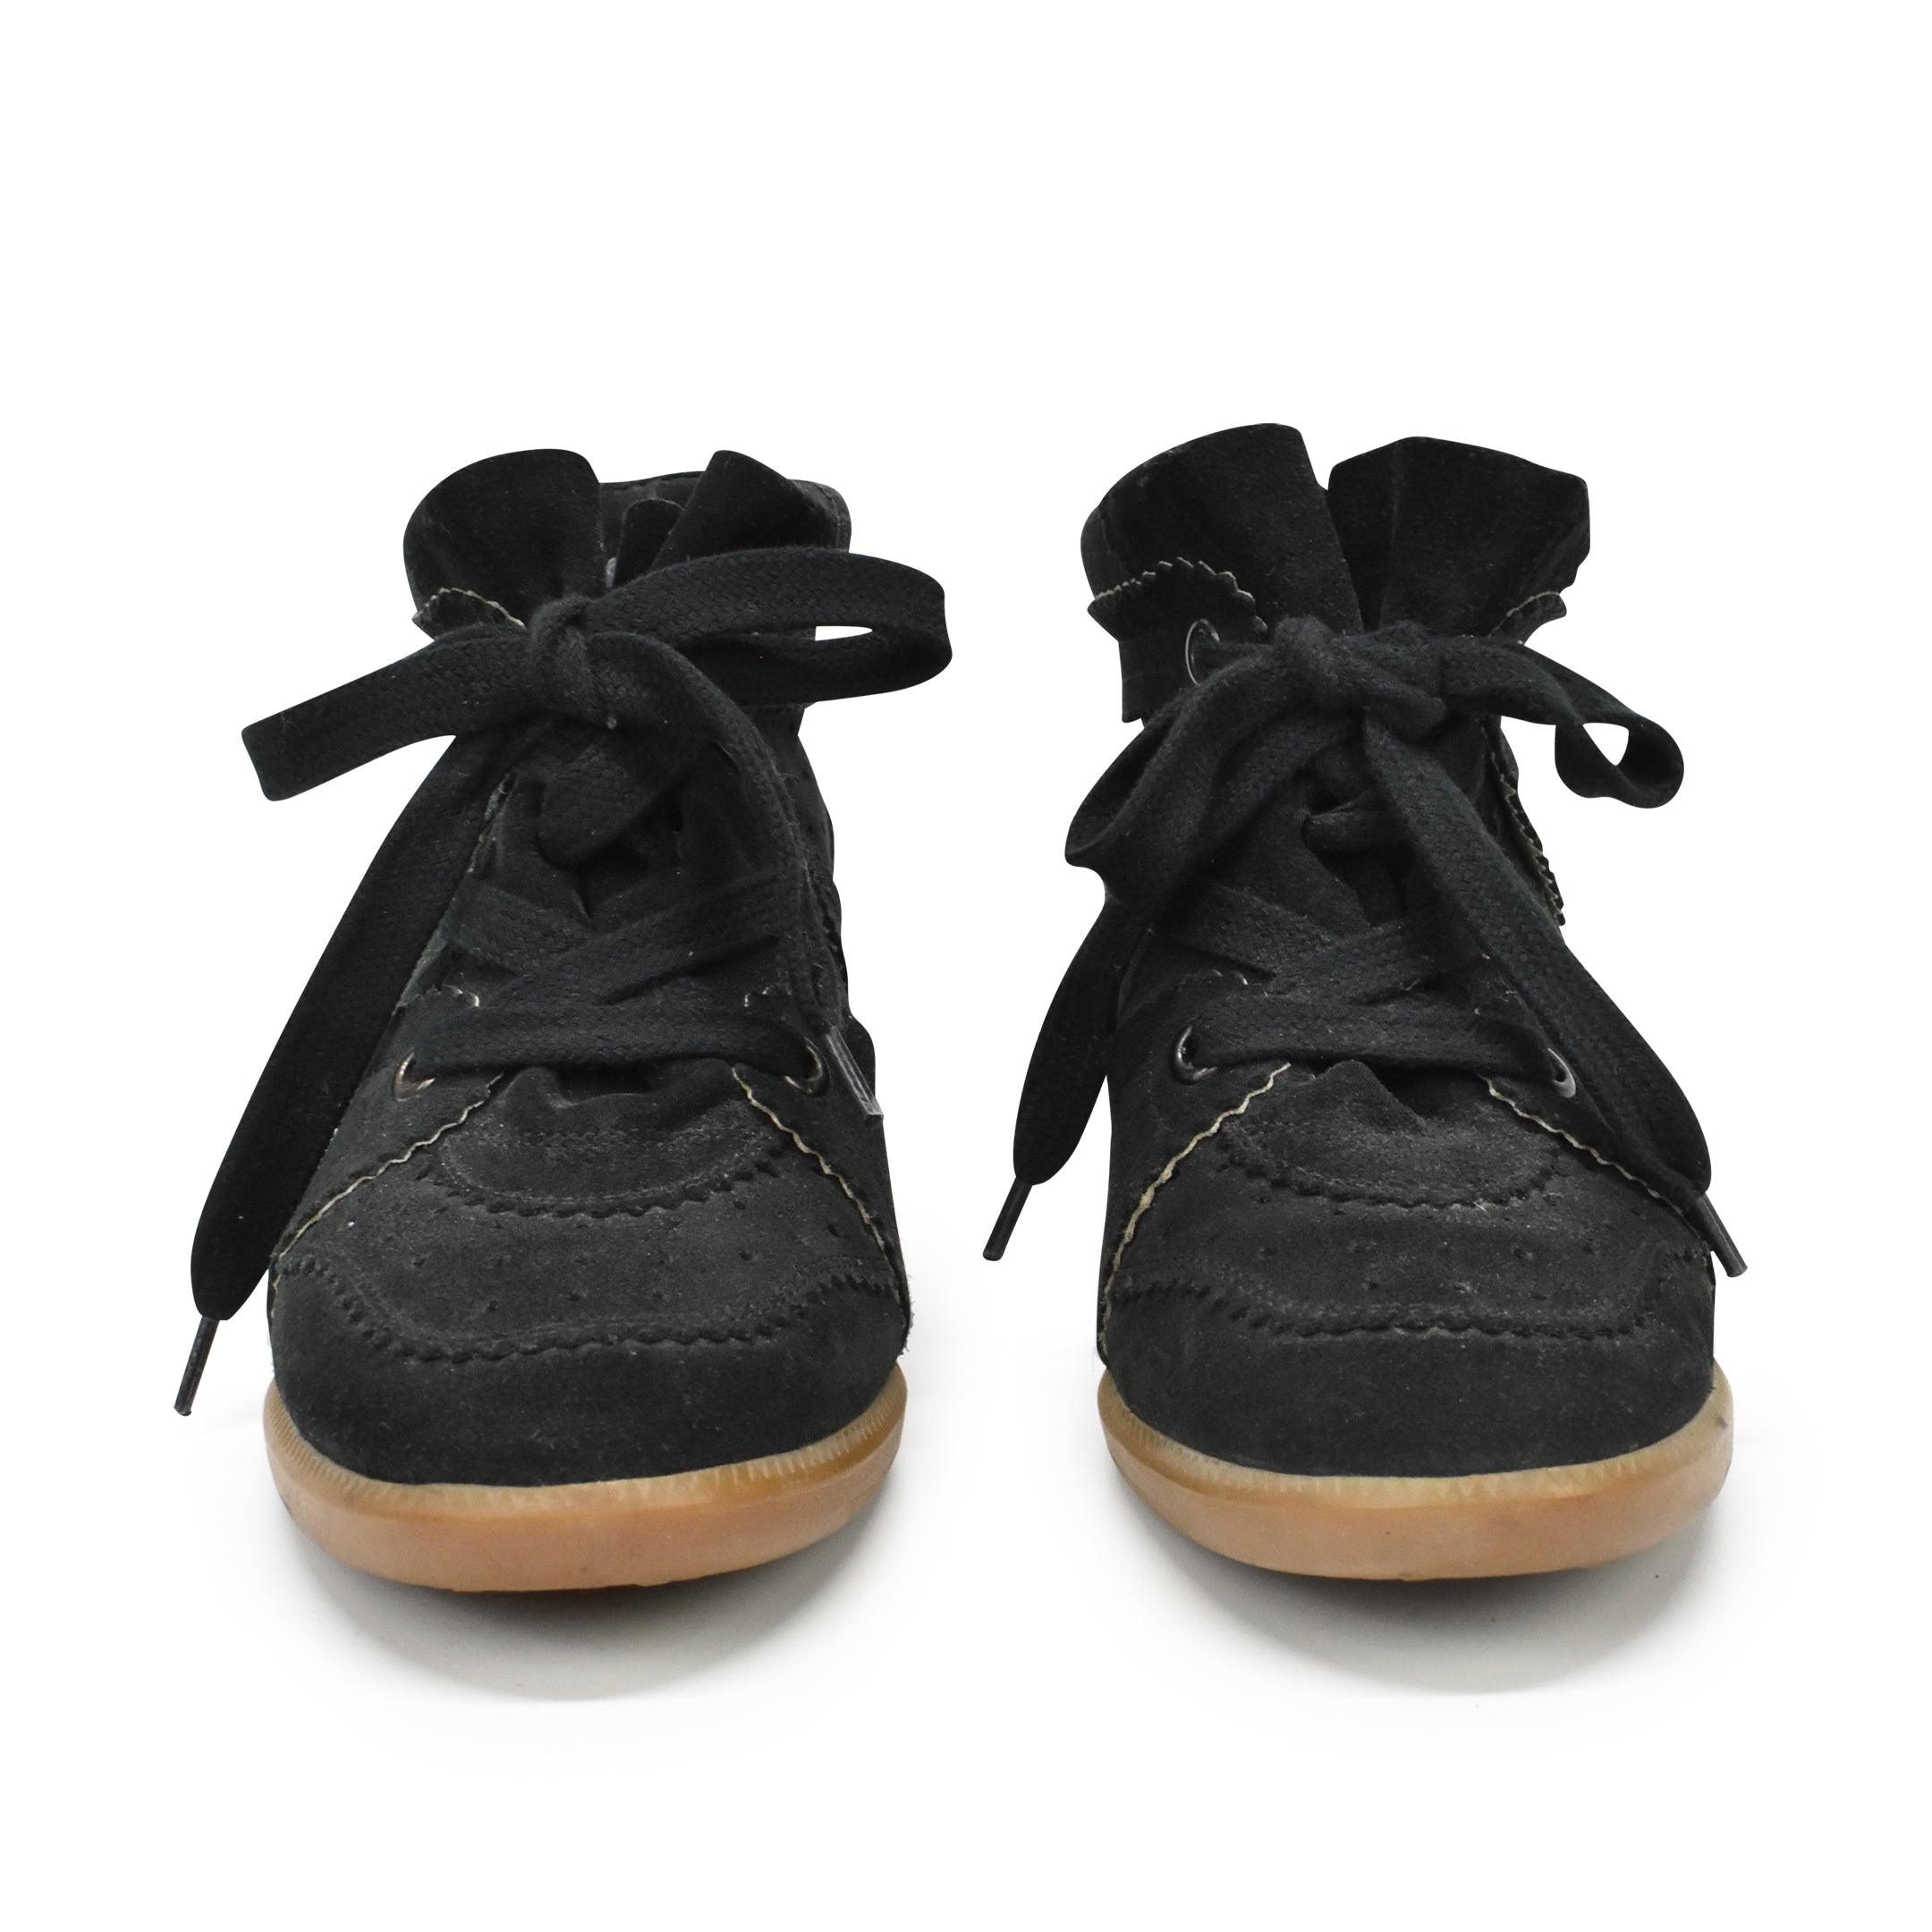 Isabel Marant Sneakers - Women's 39 - Fashionably Yours